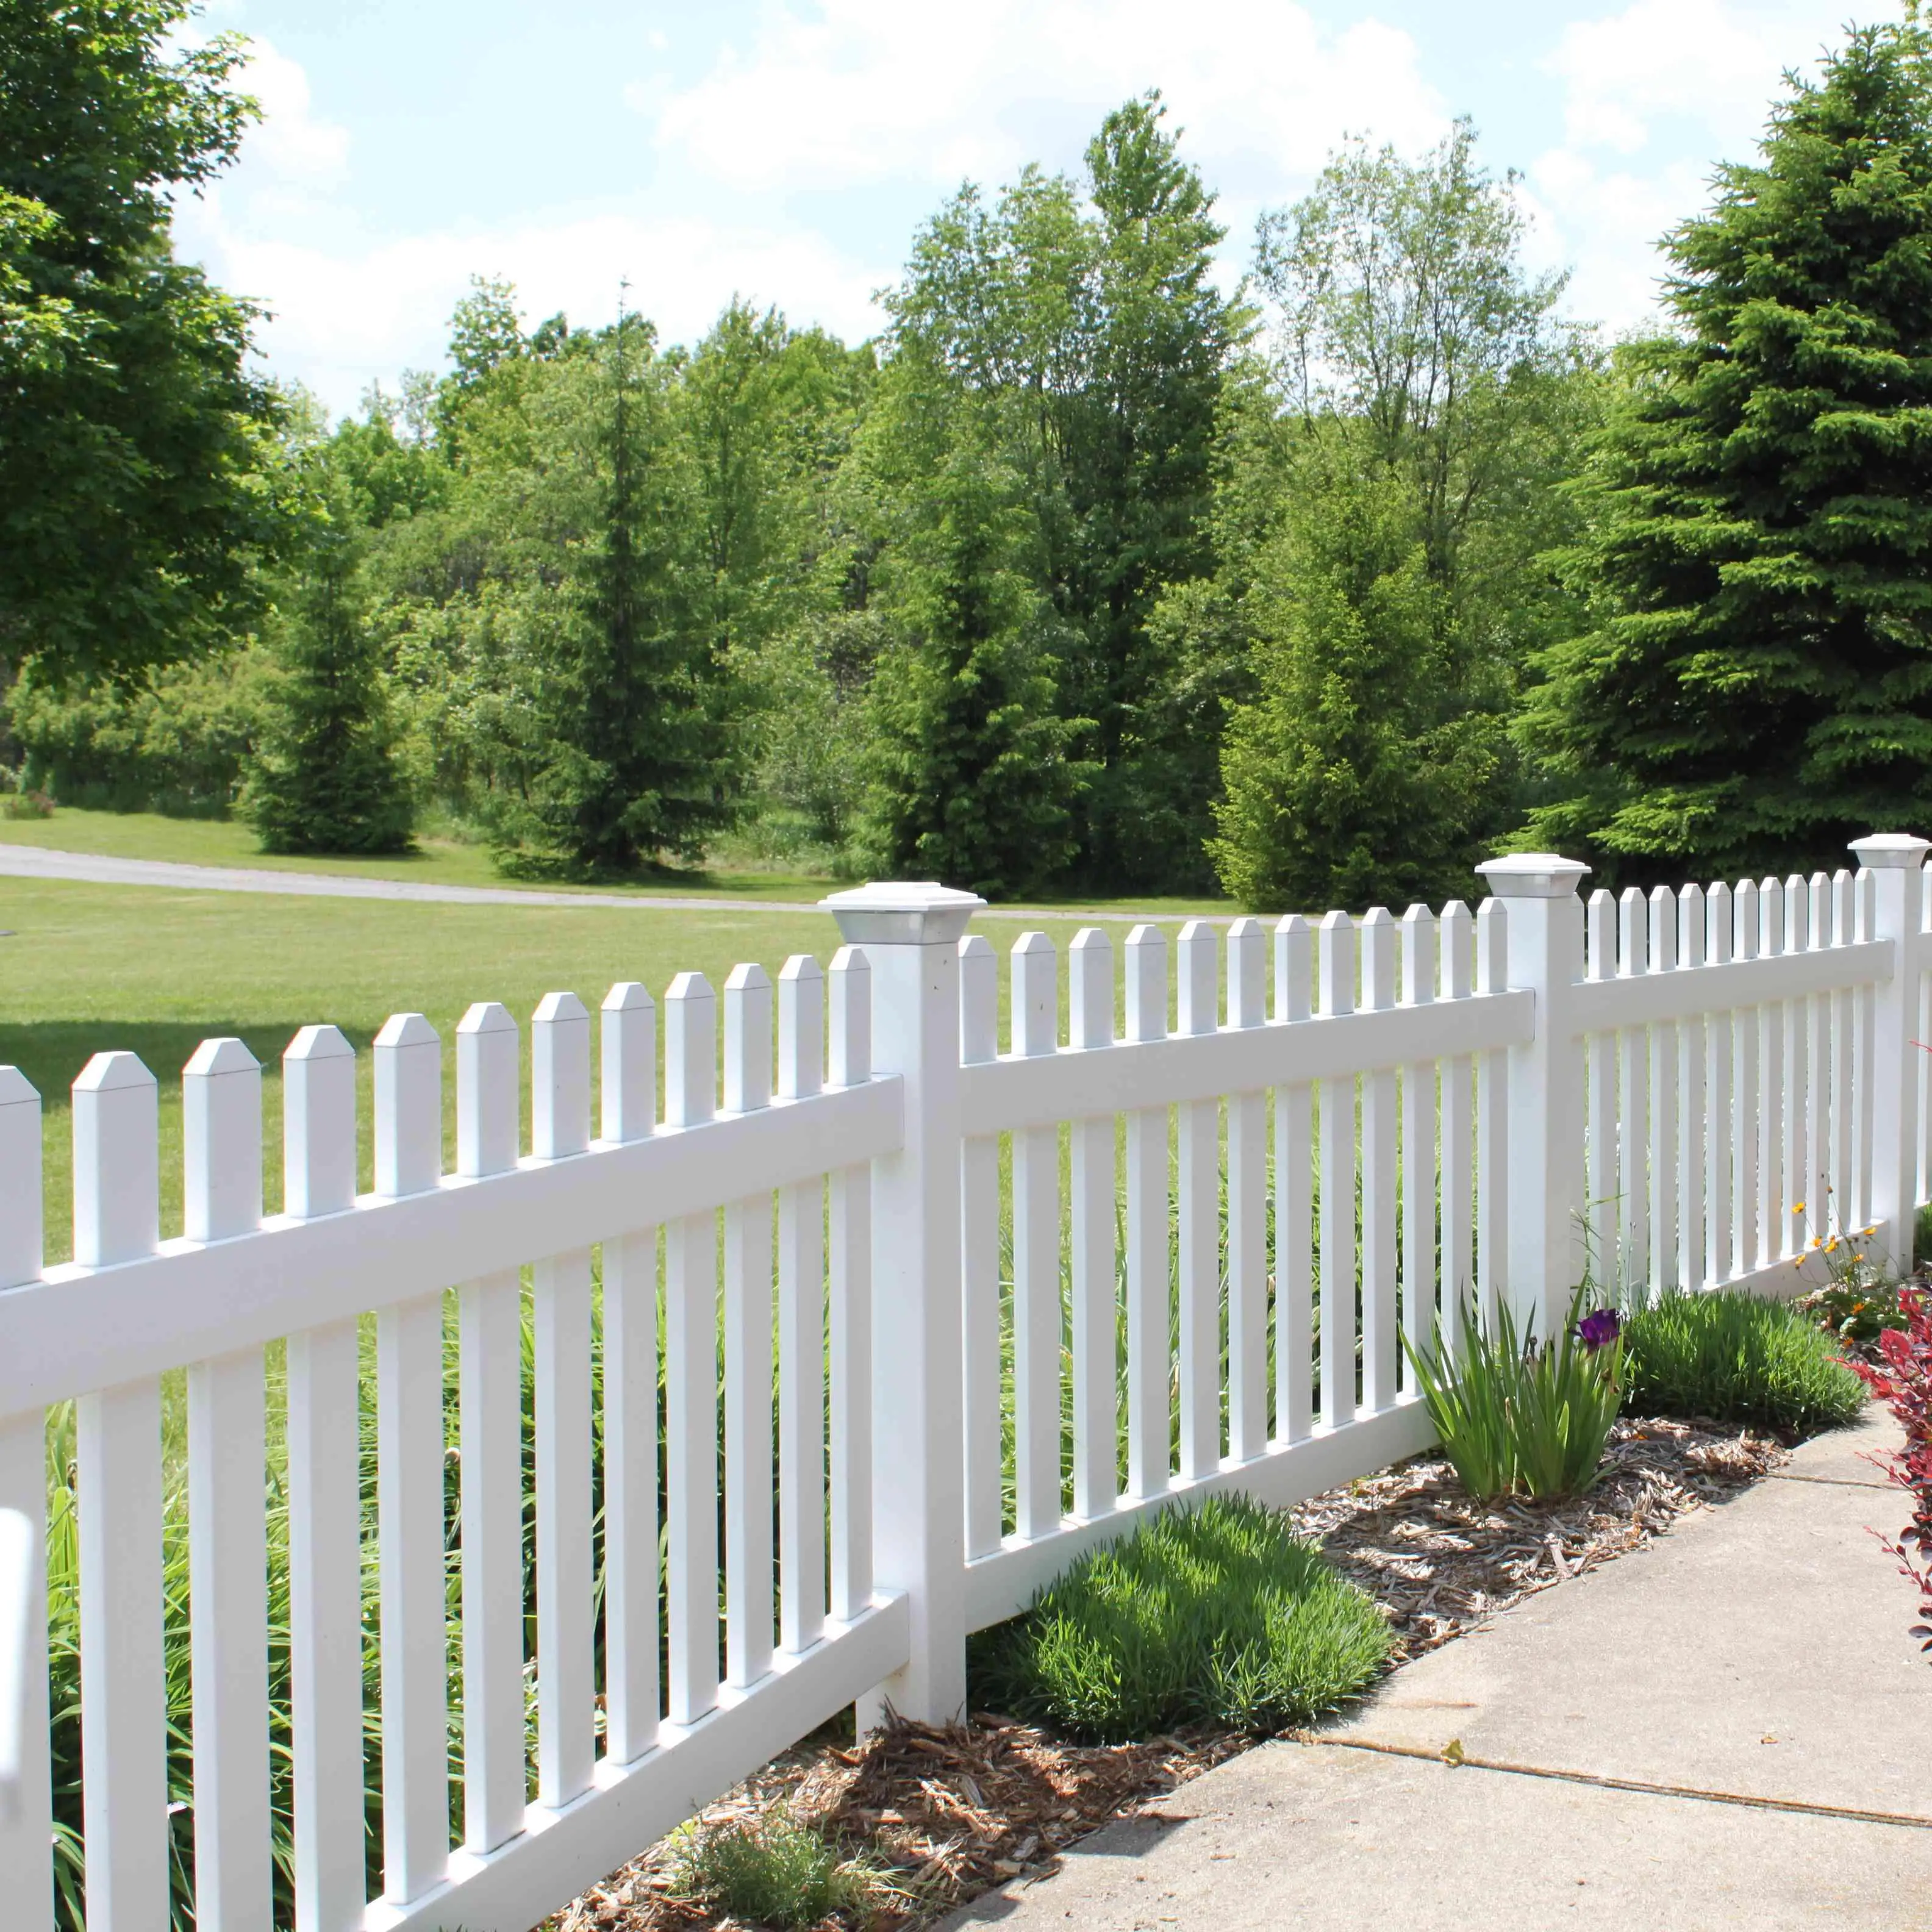 

2021 Amazon Hot Sale Fence Pvc Coated Ornamental Outdoor Yard Garden Vinyl Picket PVC Fence, Black, white, gray and brown or customized color